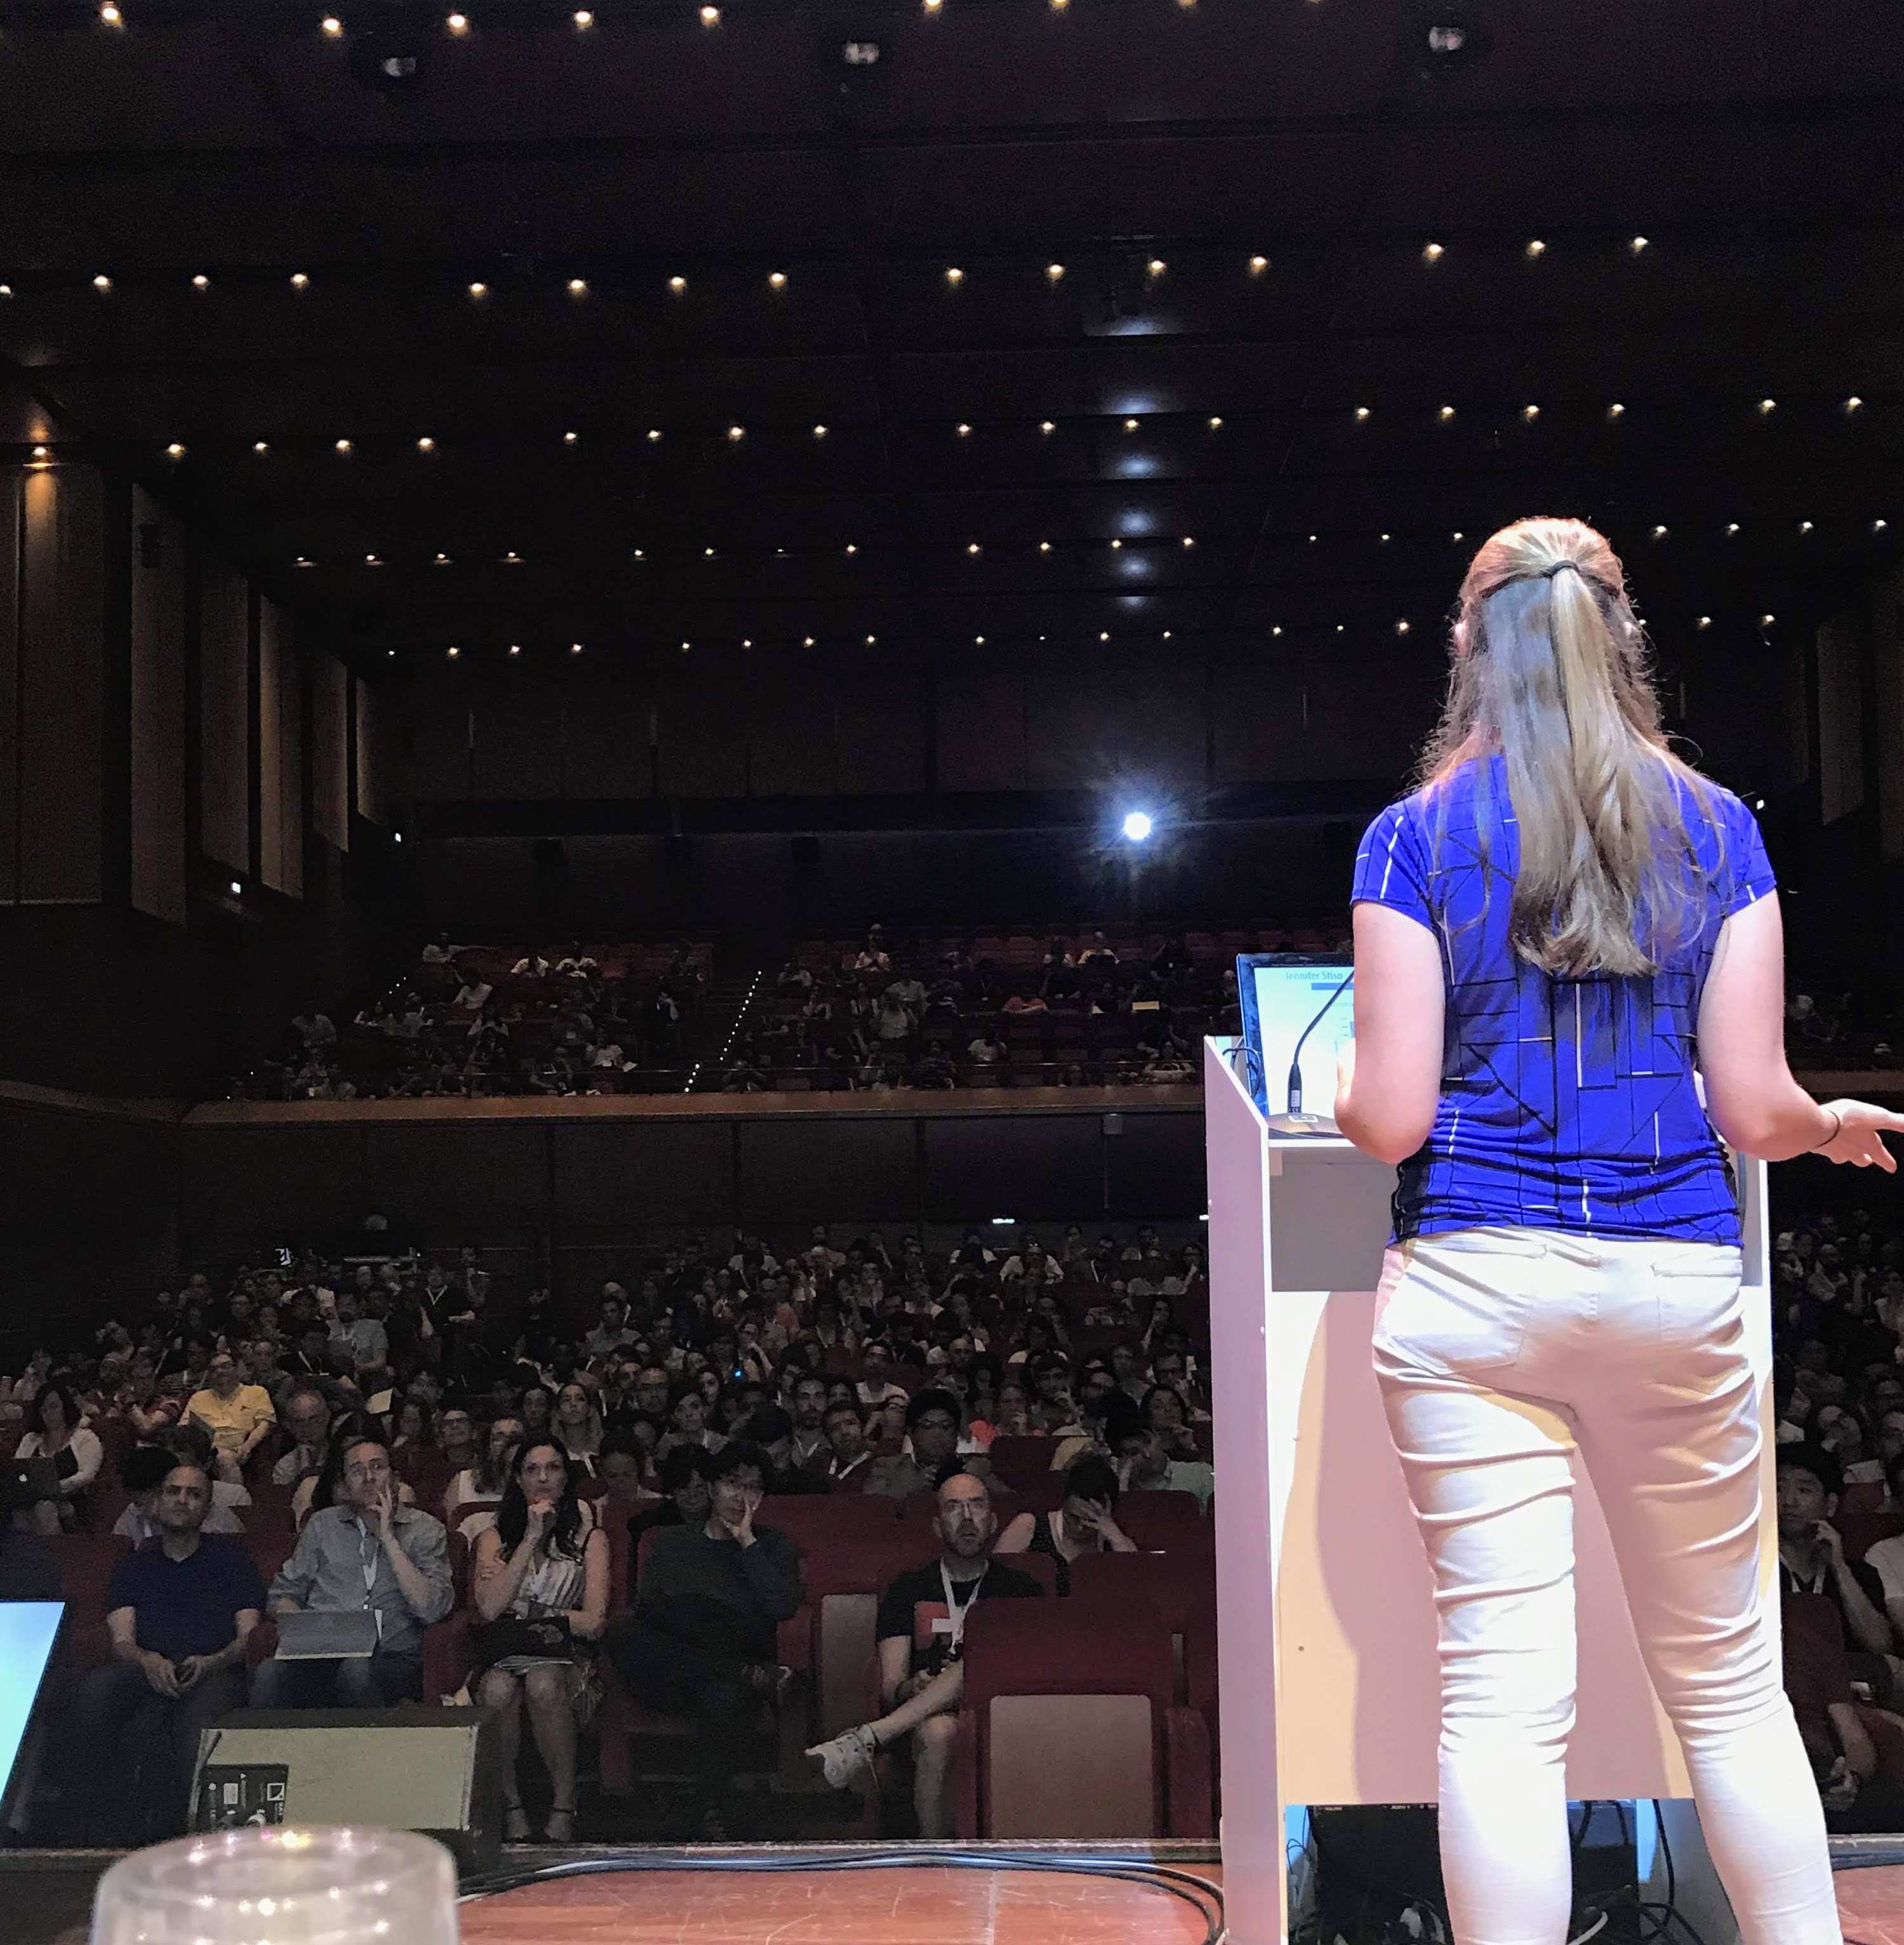 Jennifer is on stage giving a presentation, facing the audience in a large auditorium